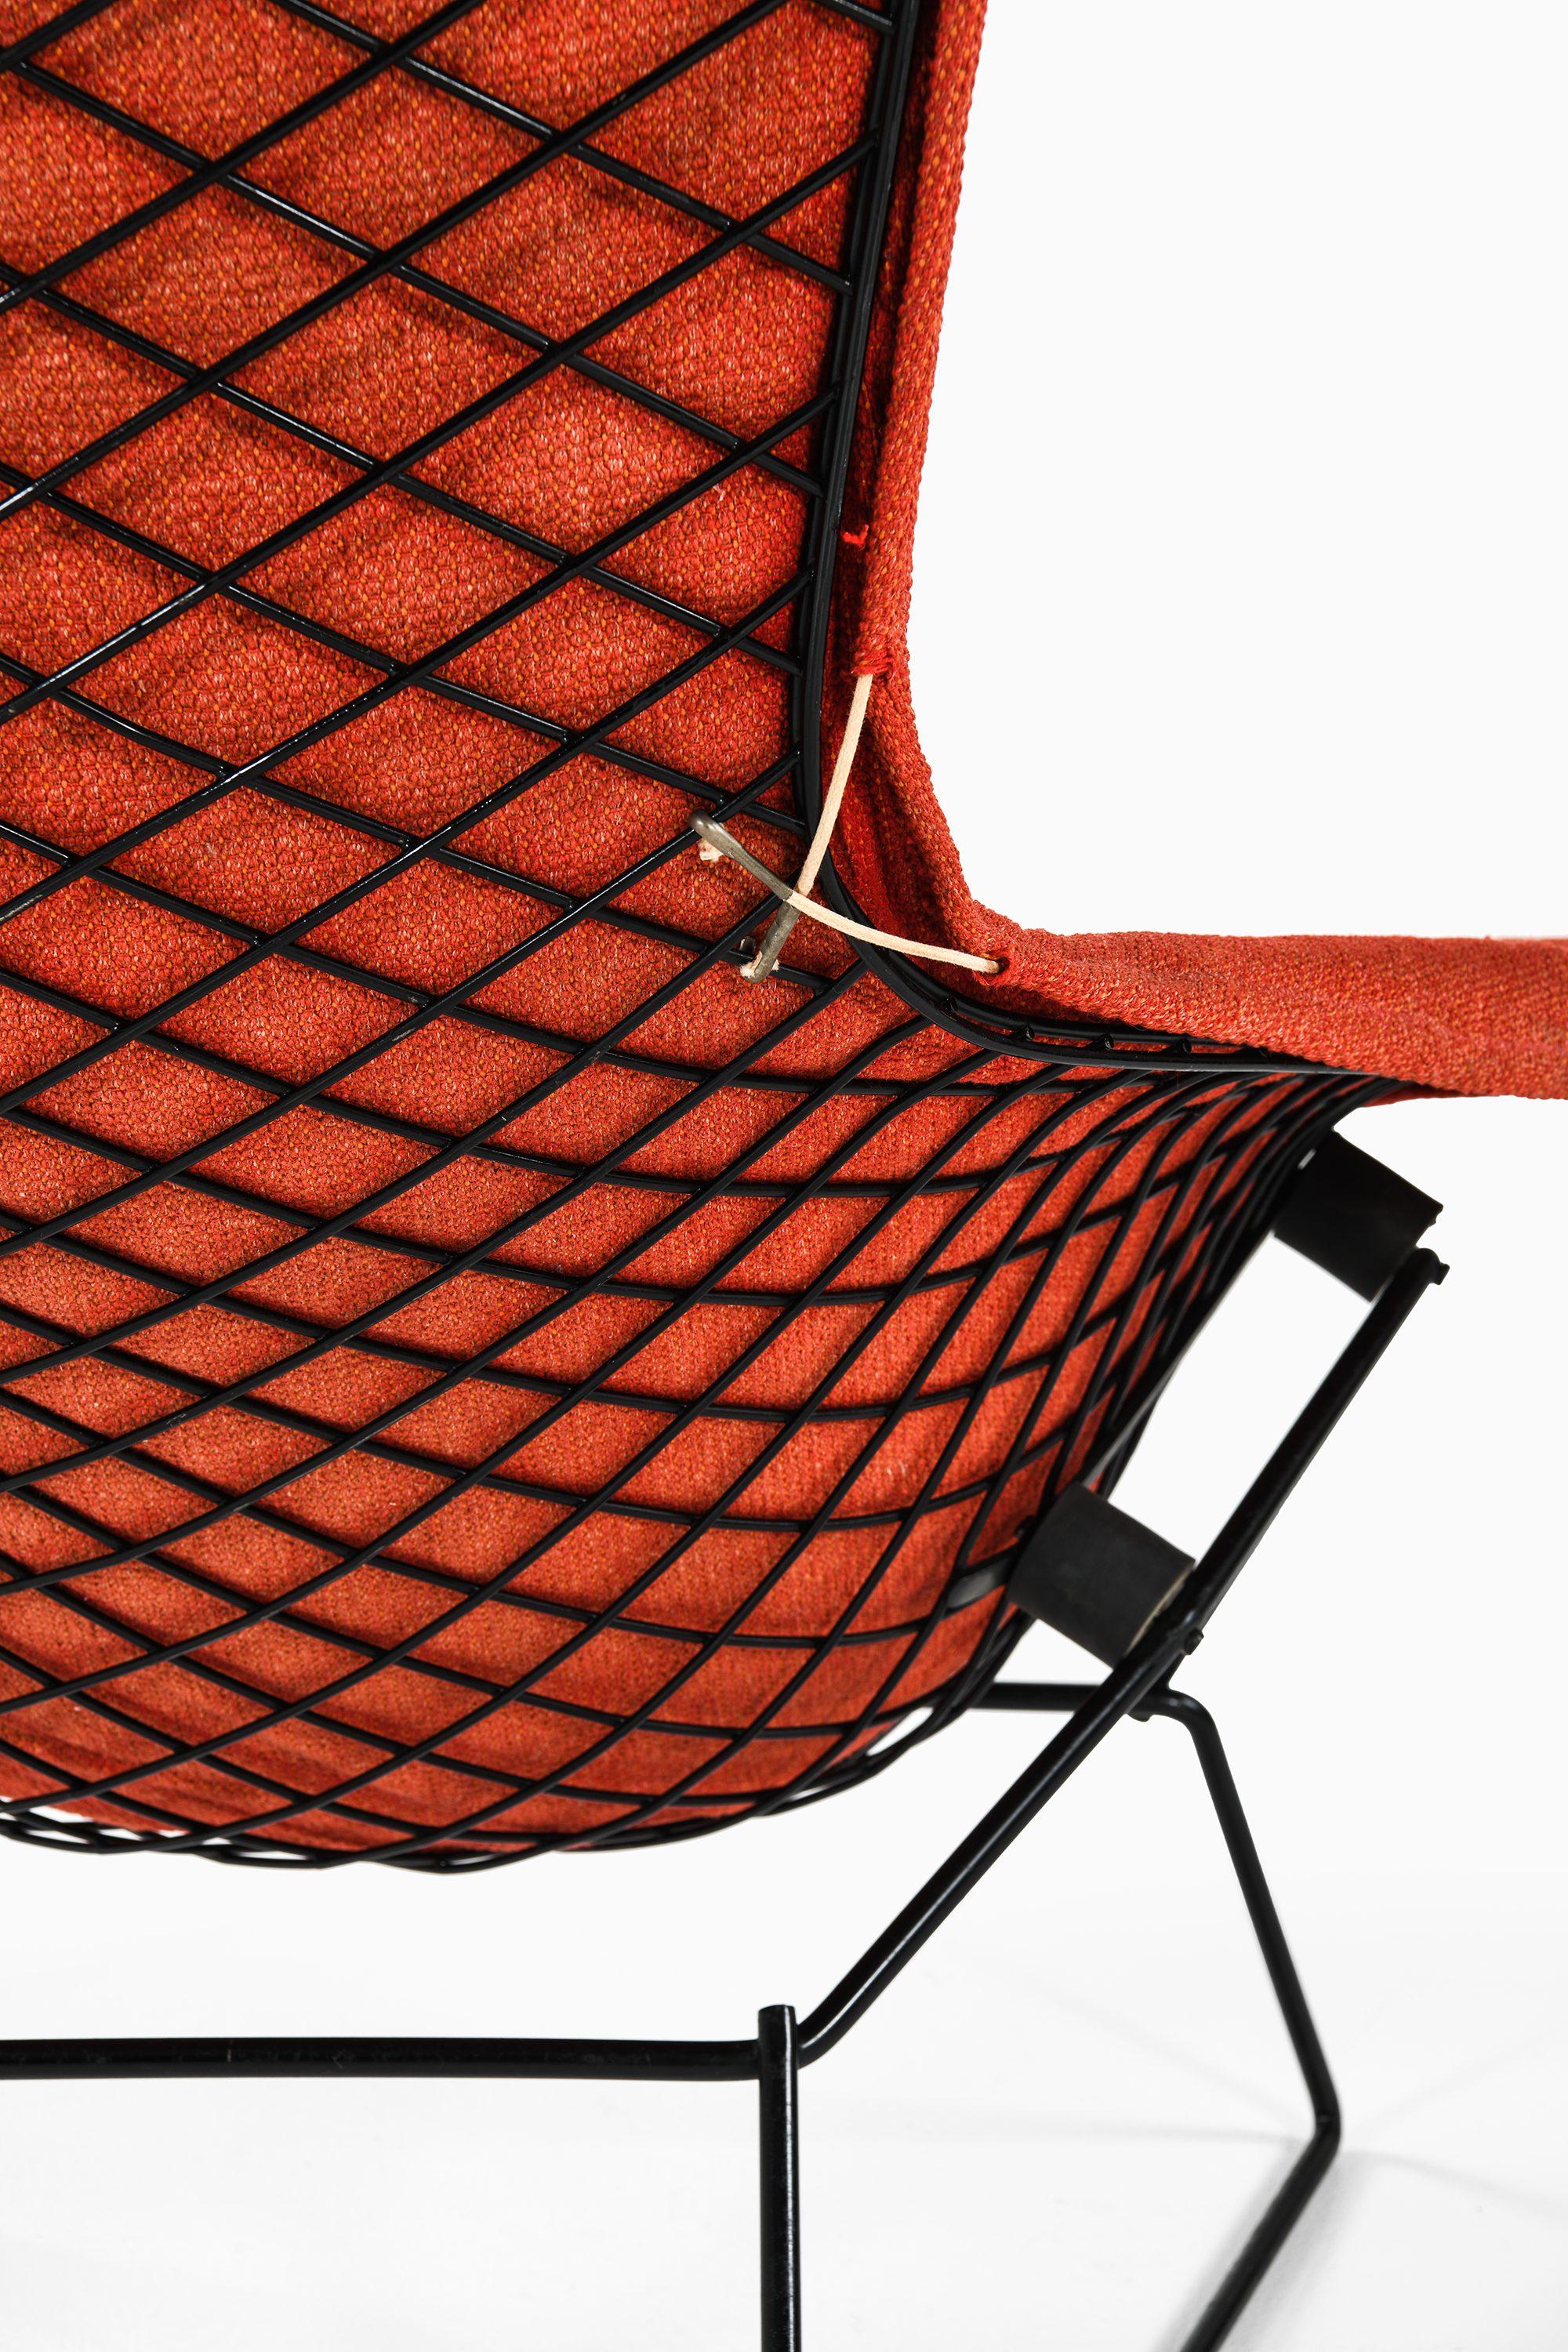 Easy Bird Chair in Black Lacquered Metal and Red Fabric by Harry Bertoia, 1950s For Sale 3